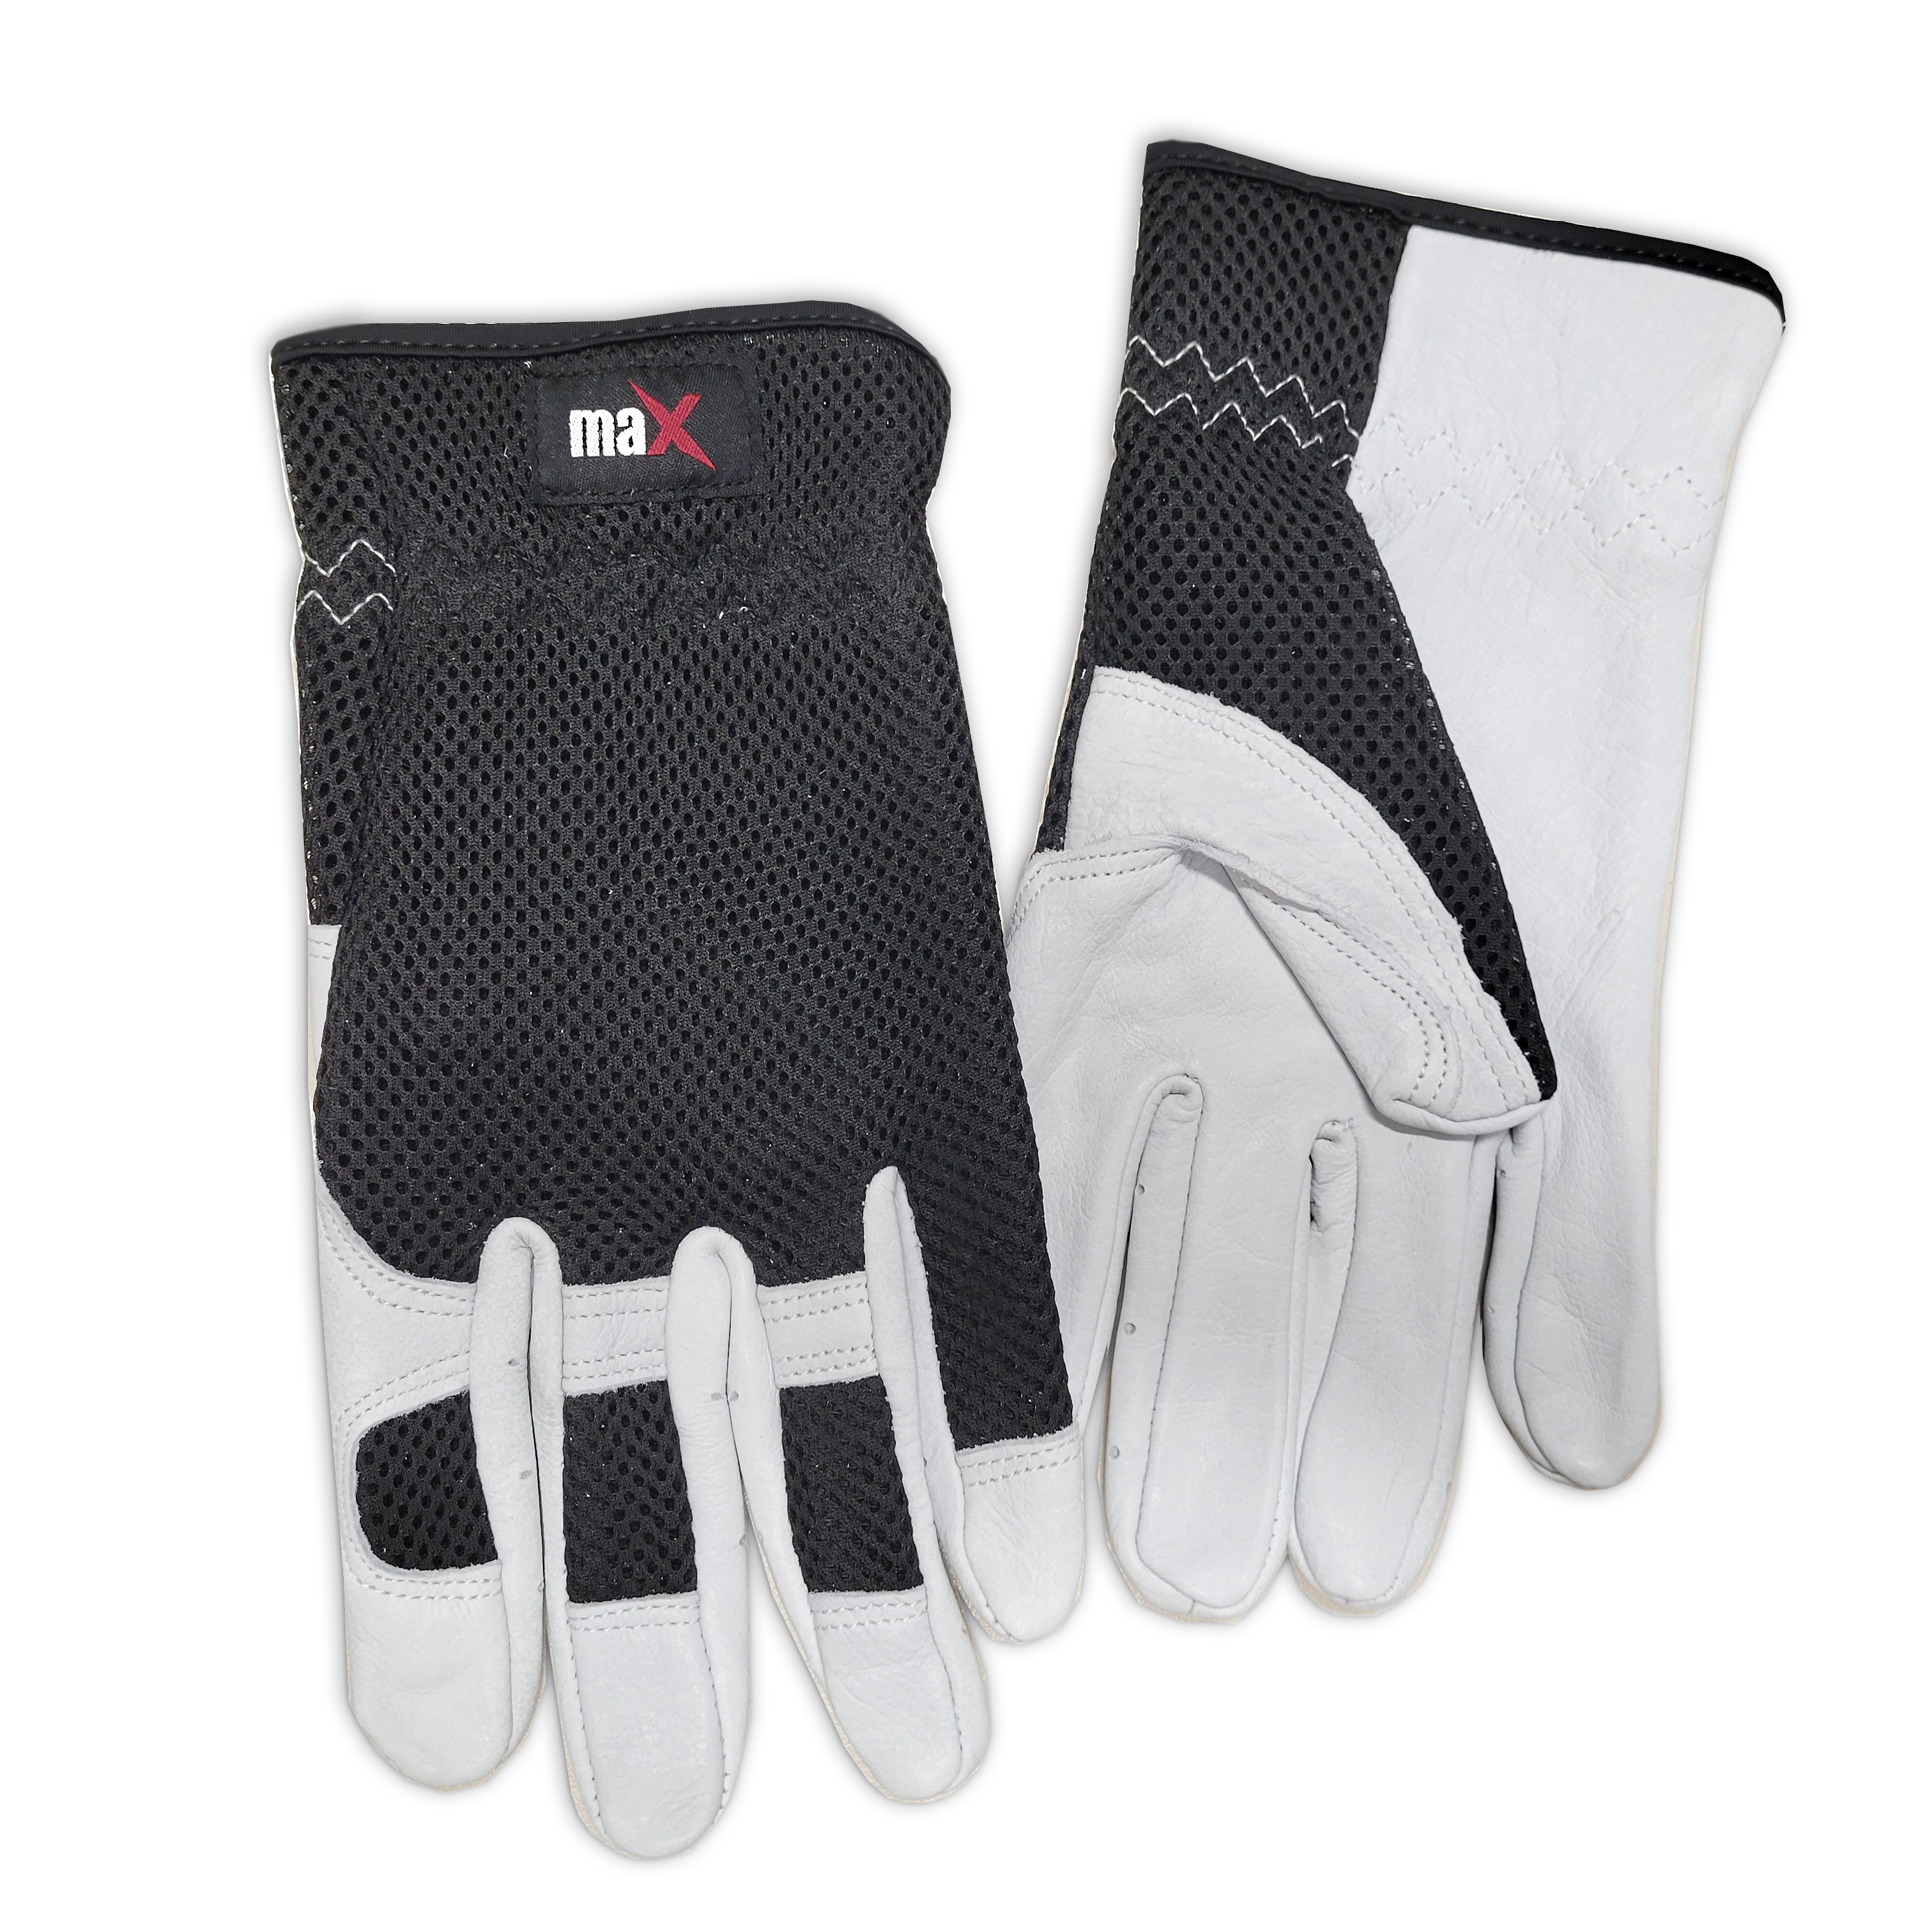 maX&trade; Extra Cowhide Gloves